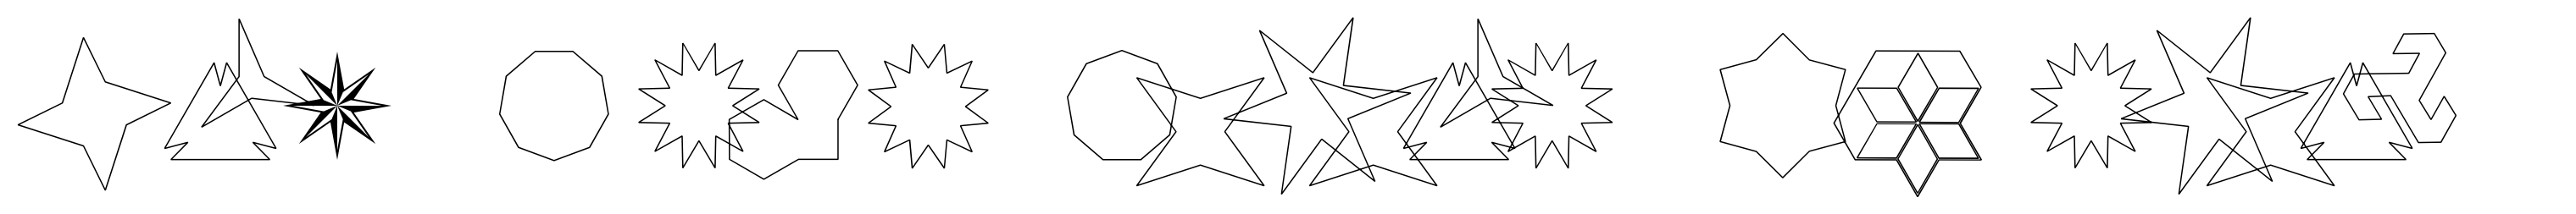 Ingy Star Tilings Outline